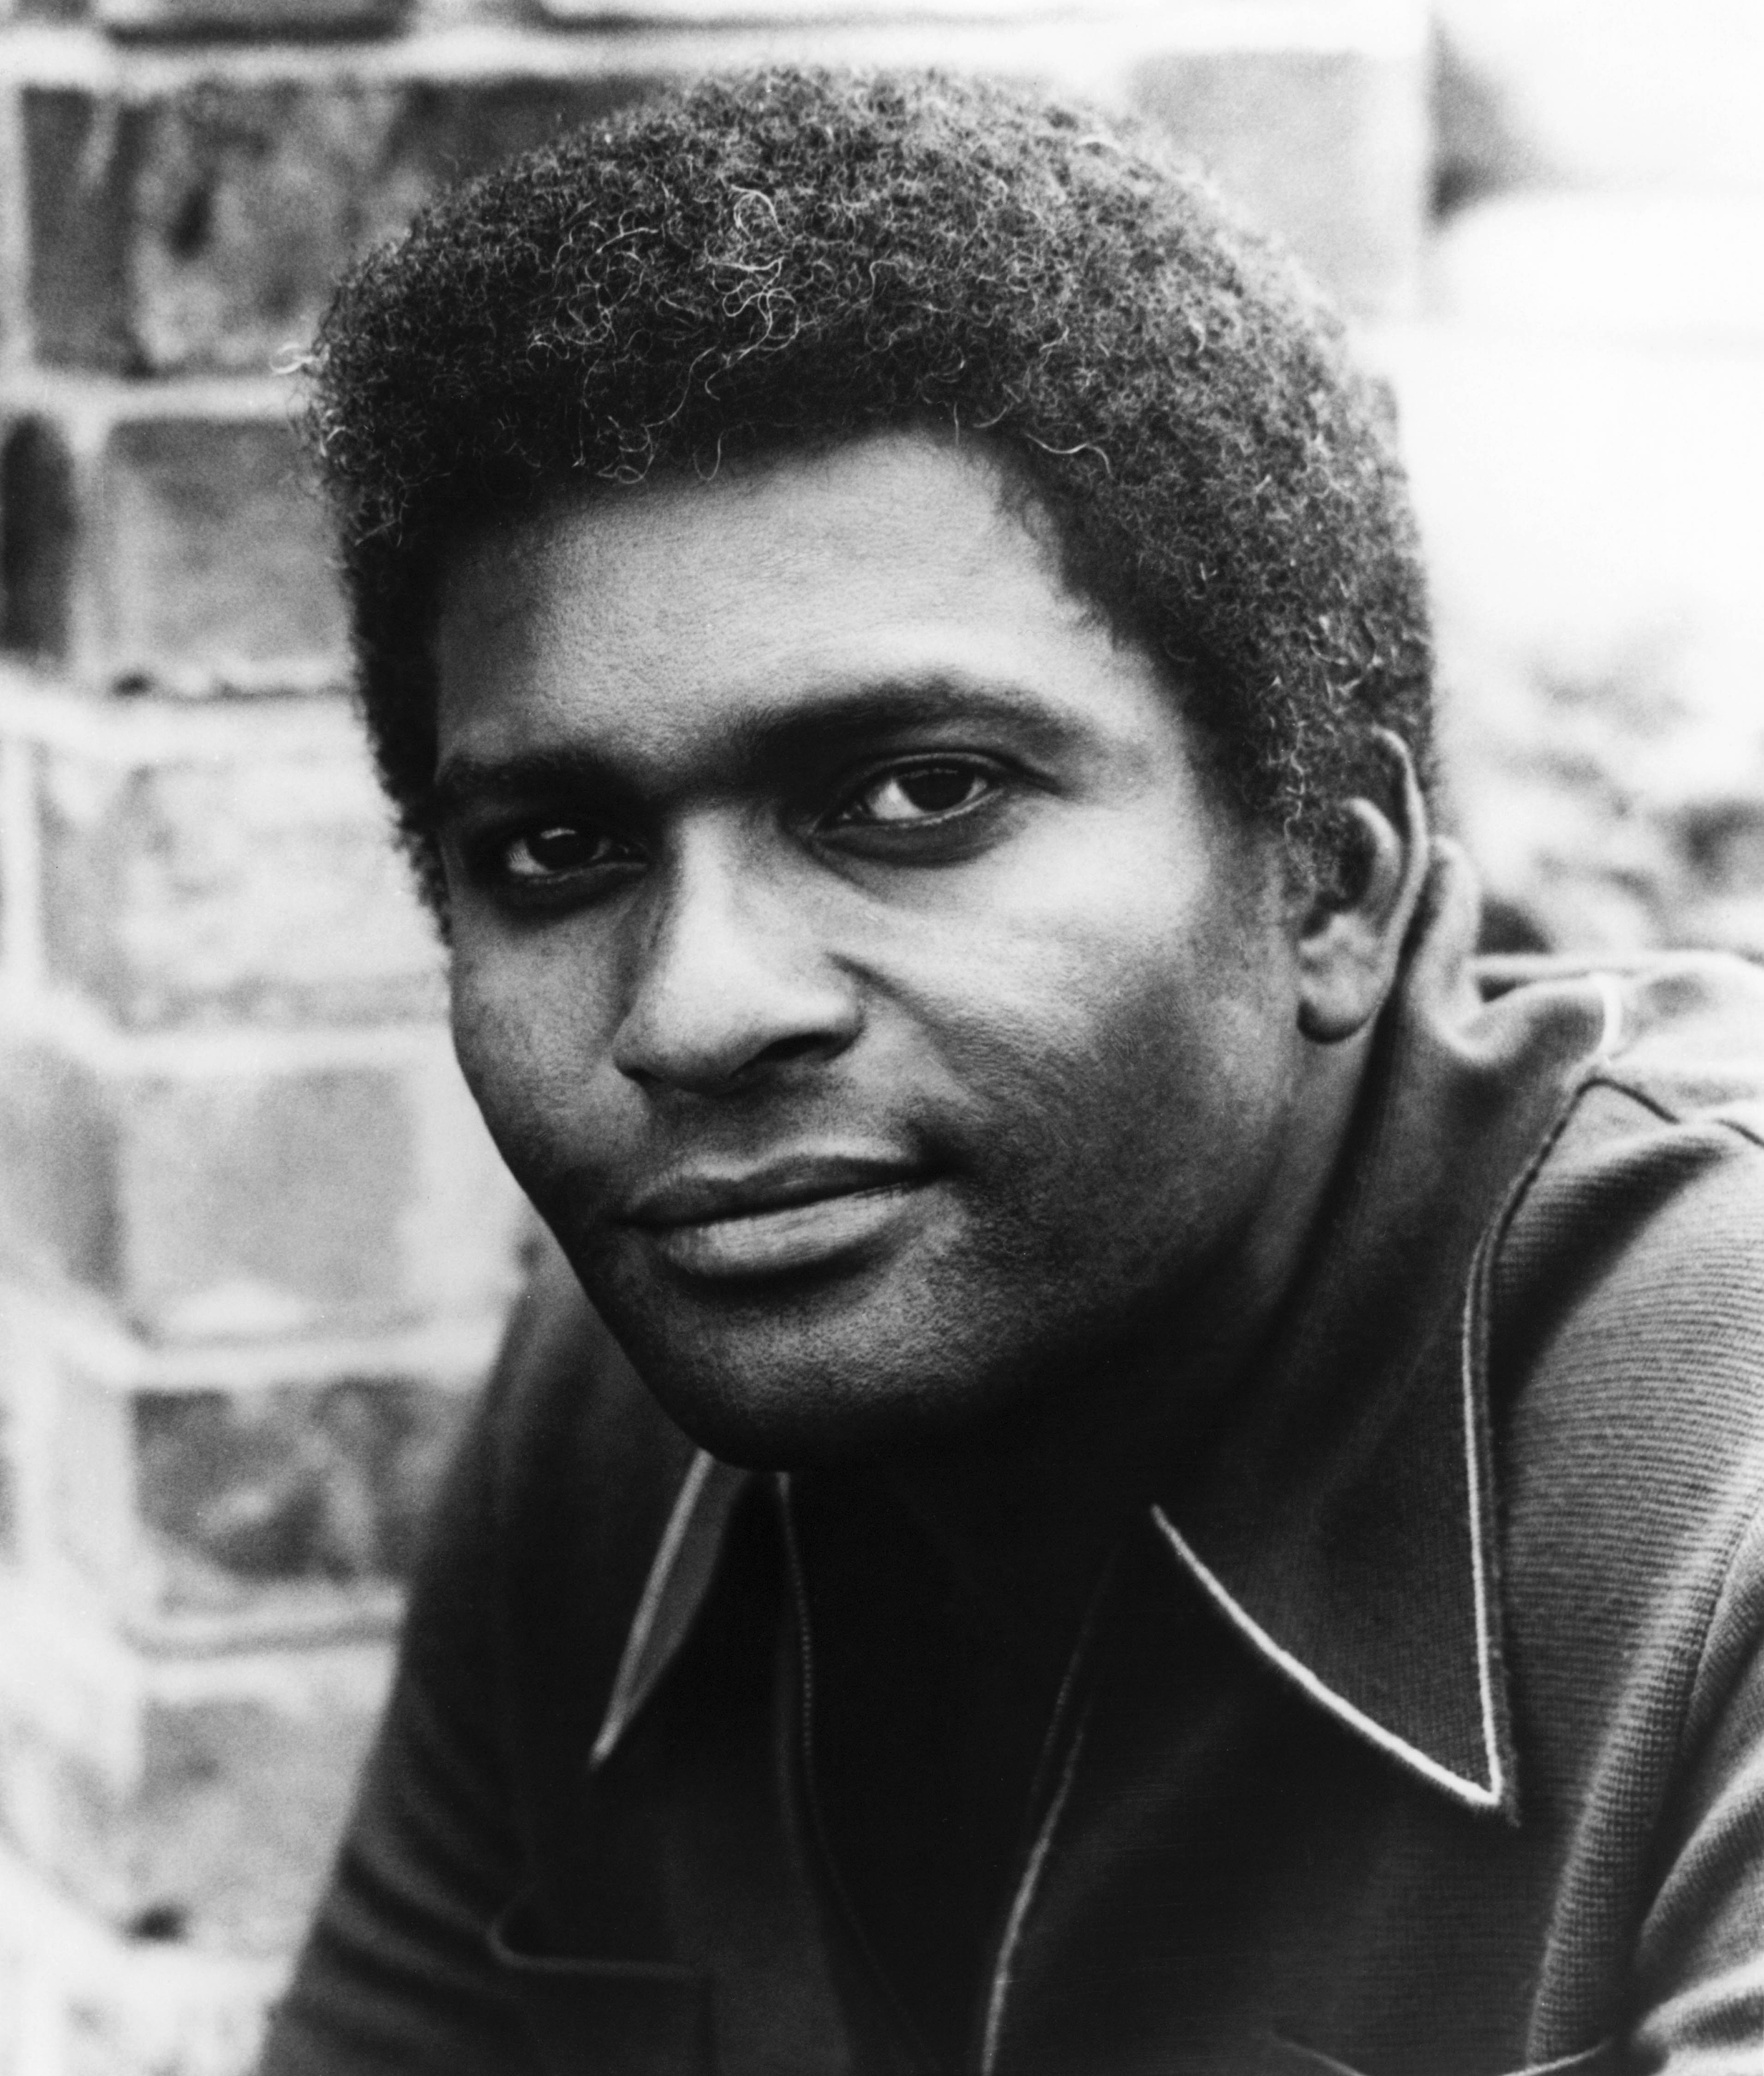 Portrait photo of Charlie Pride circa 1968. | Photo: Getty Images